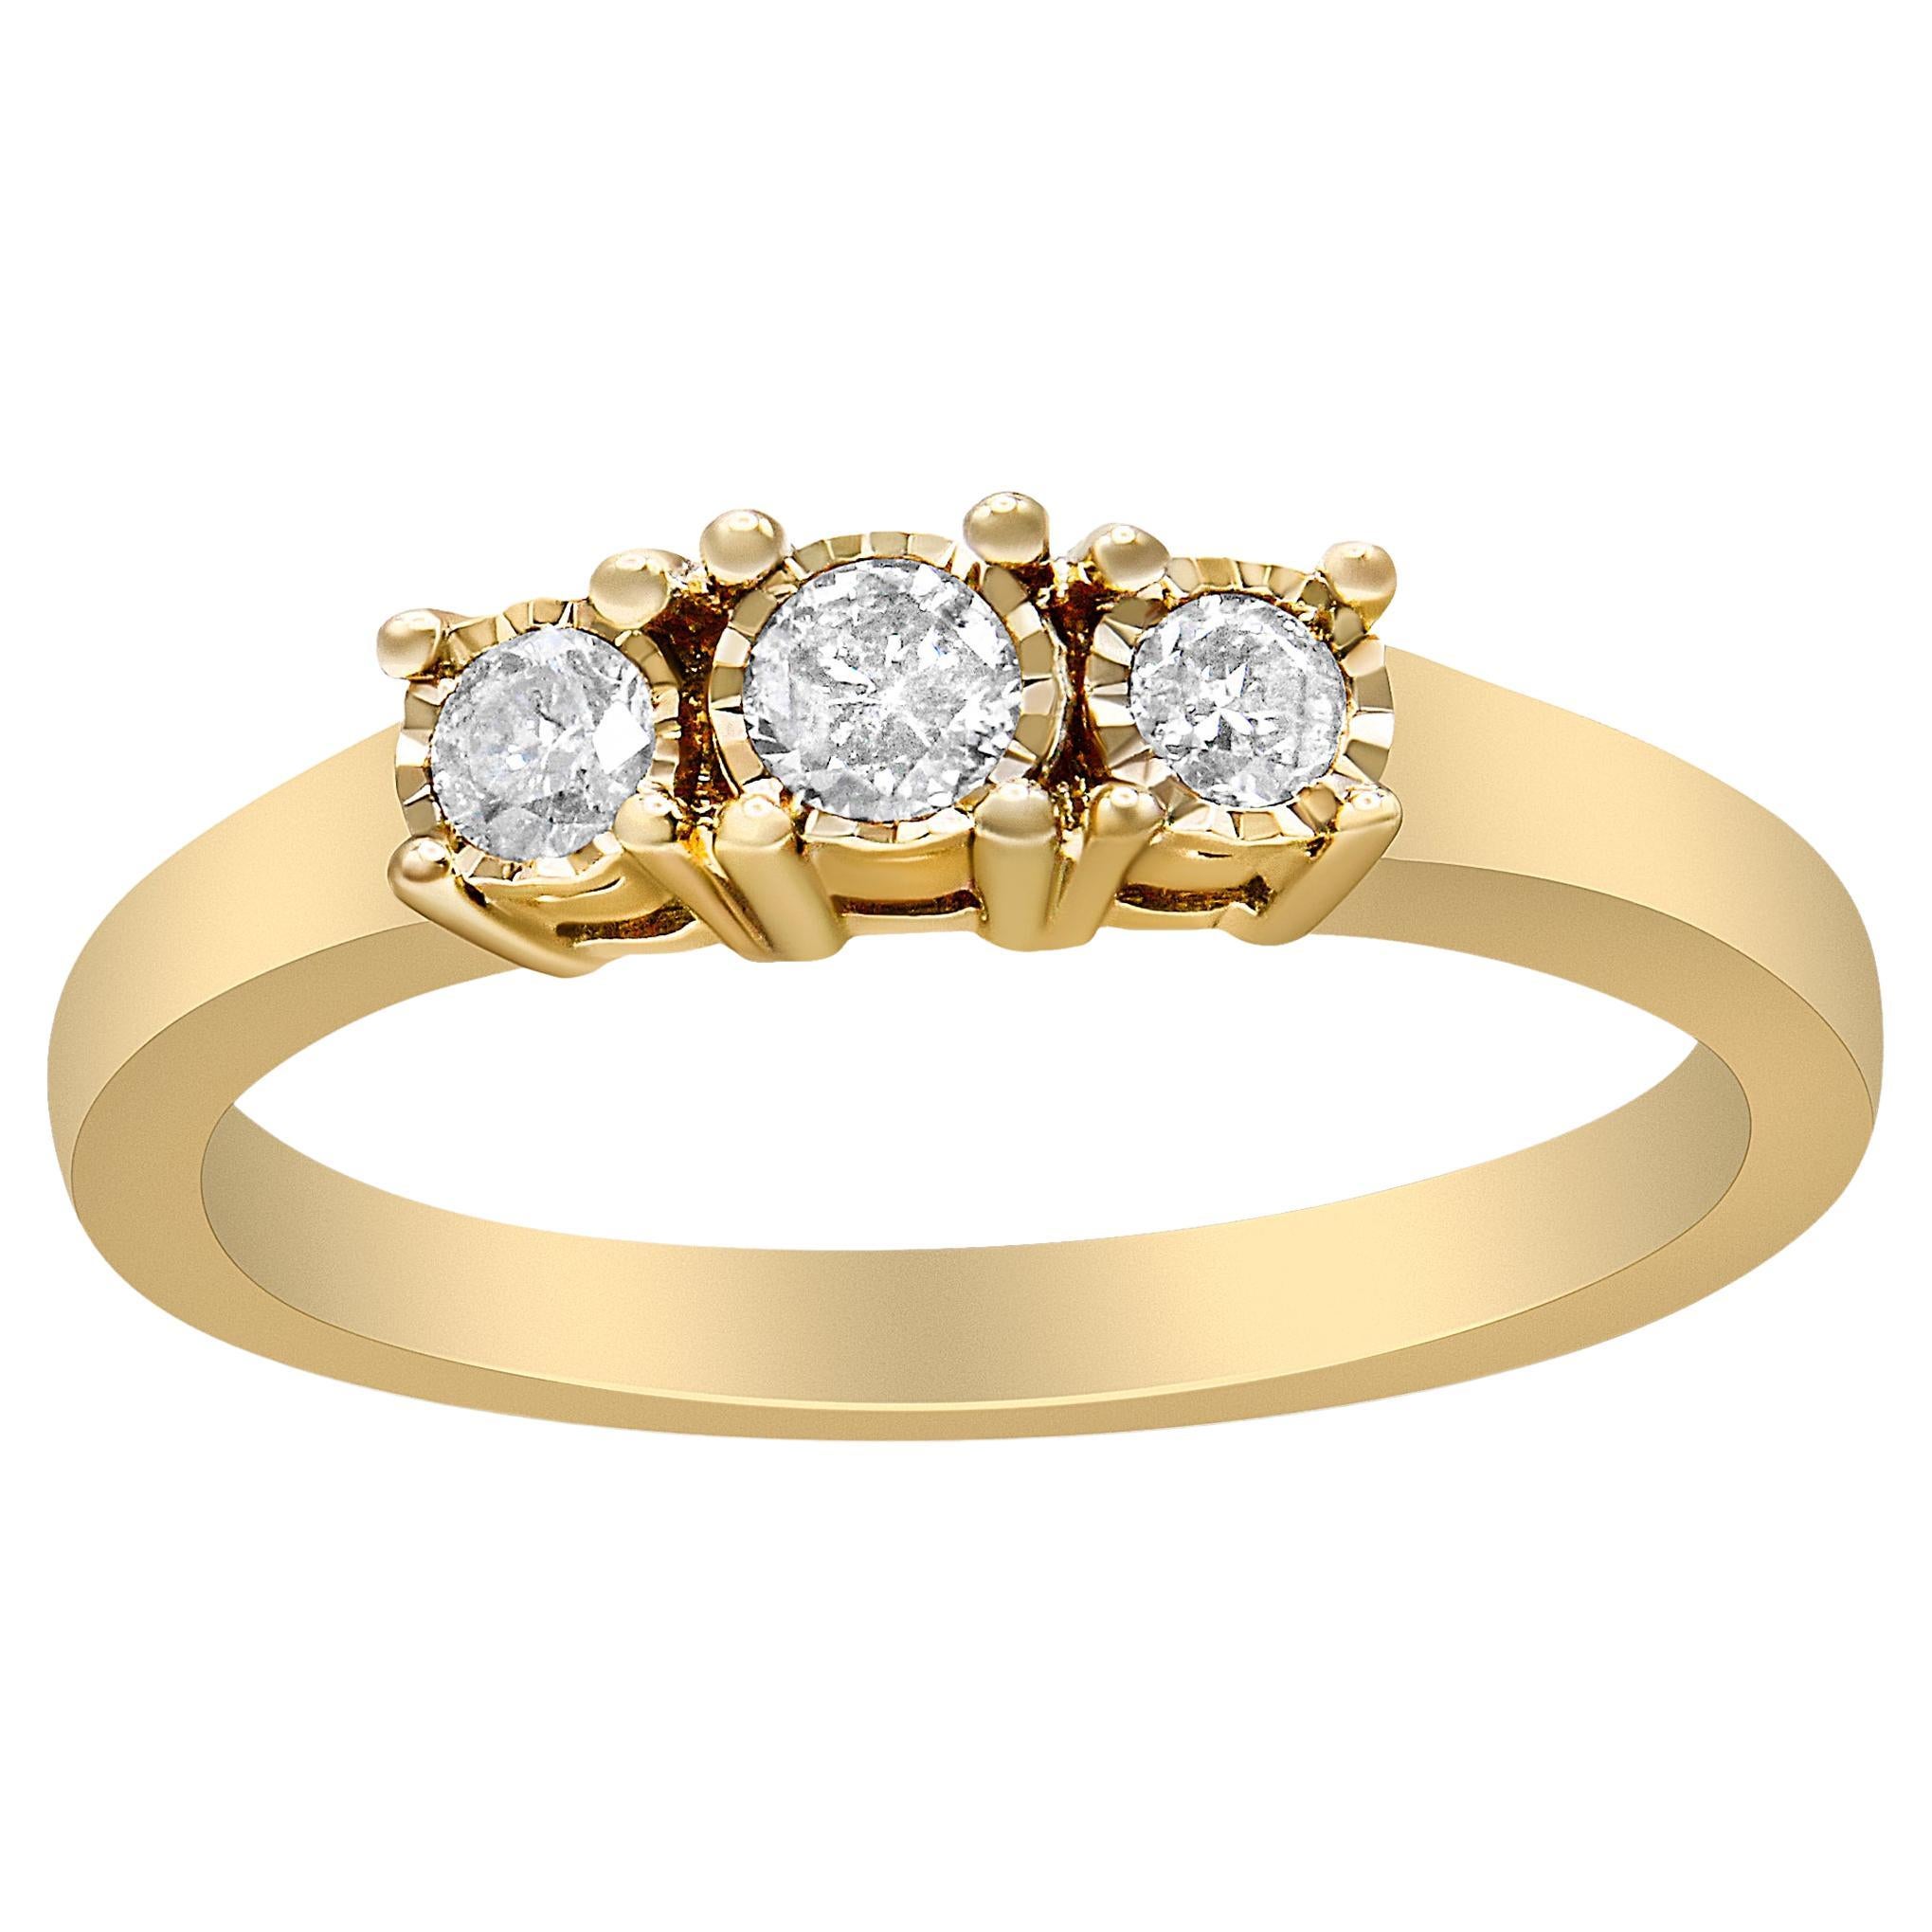 For Sale:  14K Yellow Gold Over Silver 1/4 Carat Diamond 3 Stone Illusion Plate Ring